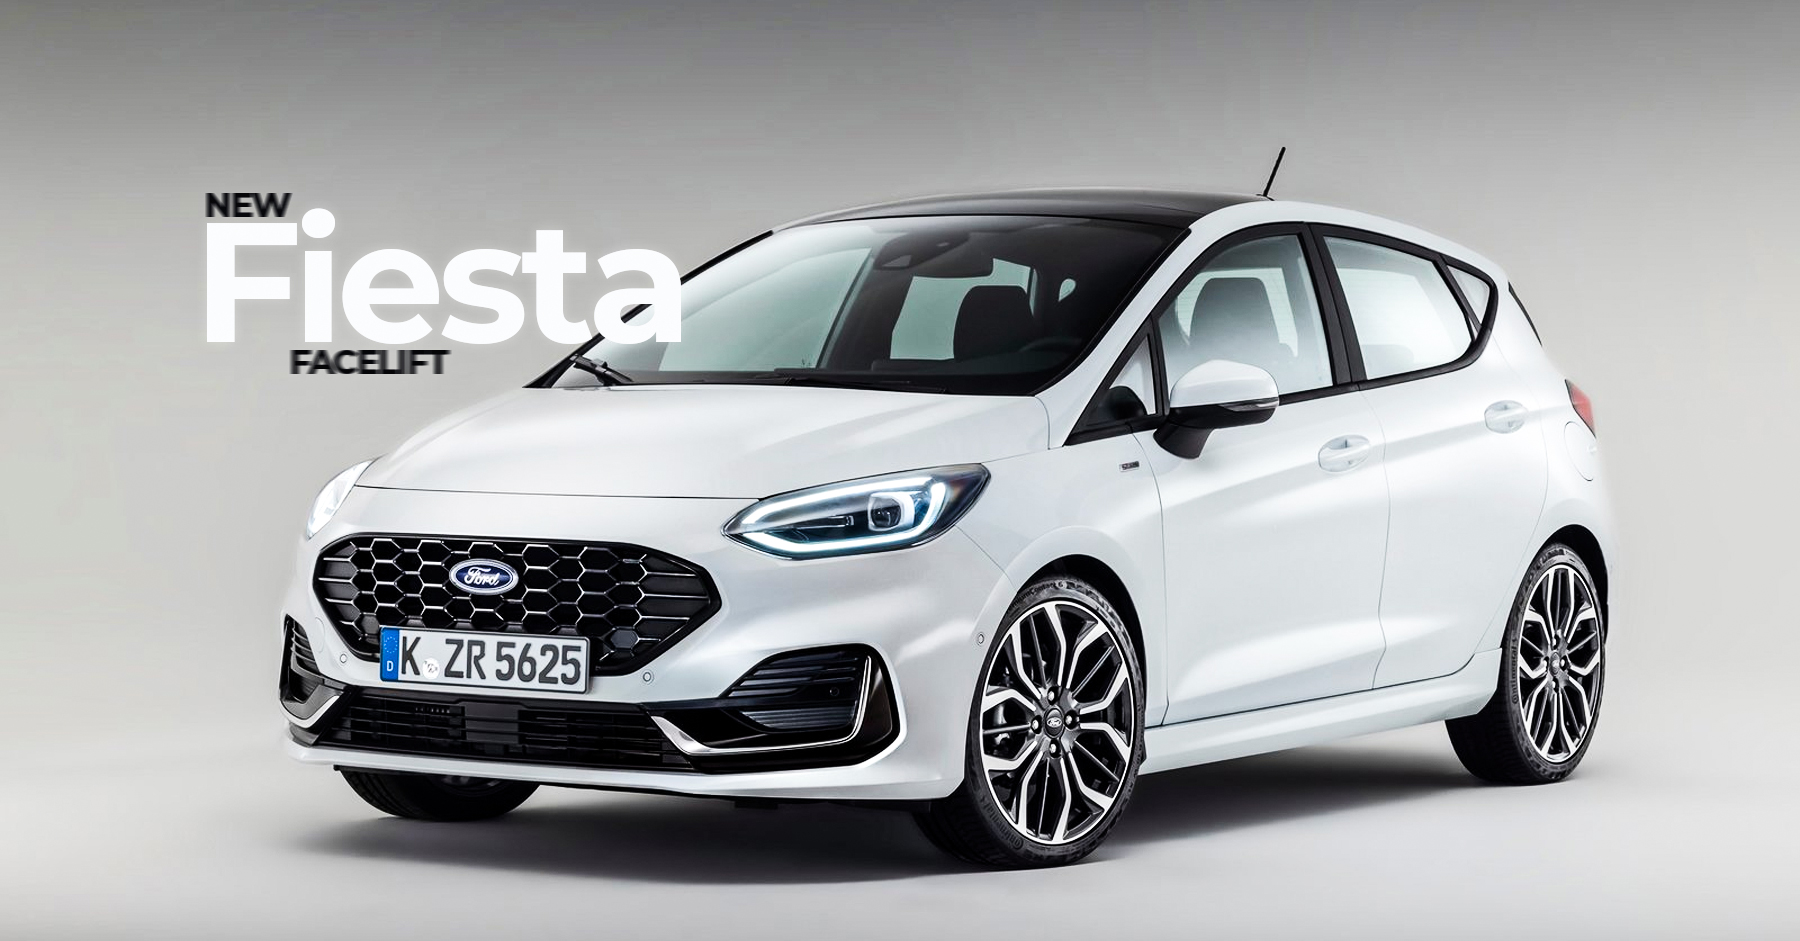 New Ford Fiesta facelift